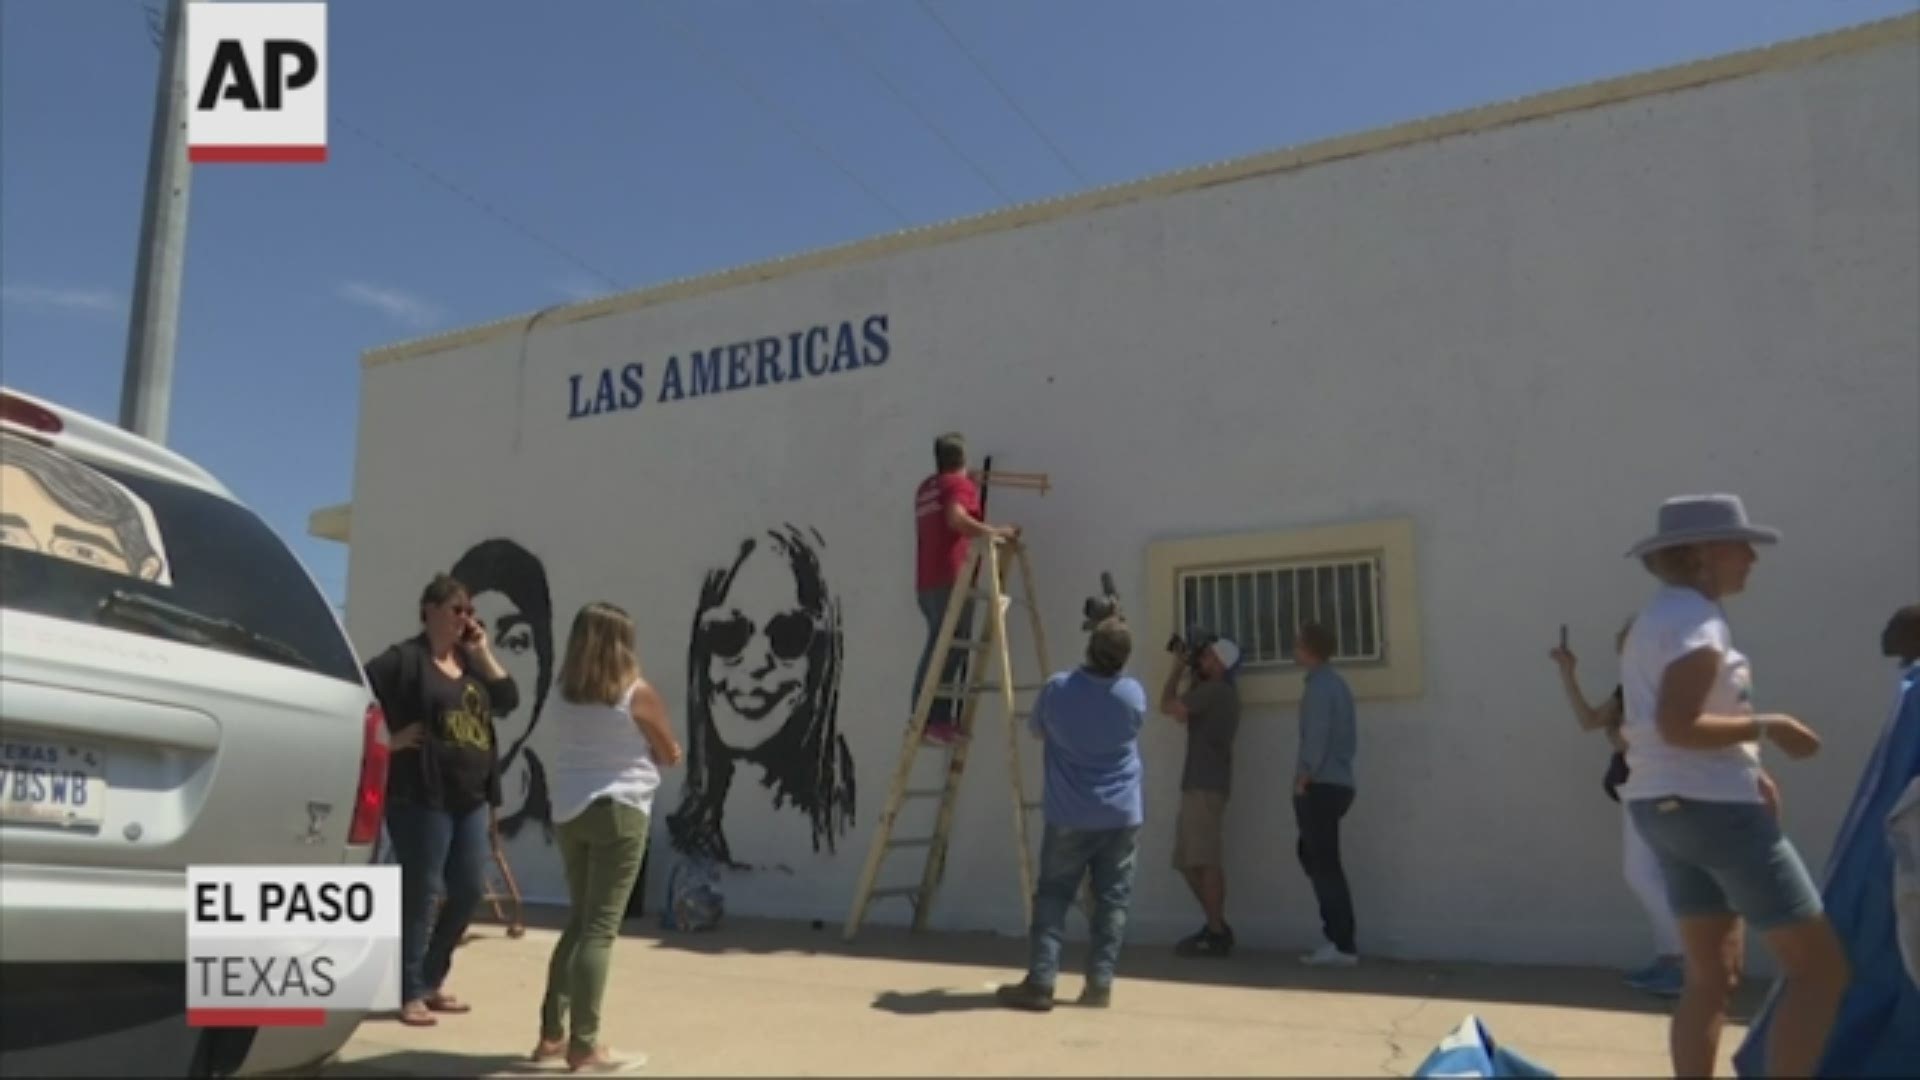 The father of a Parkland, Florida, shooting victim painted a mural in El Paso, Texas on the same weekend a shooter killed 20 people there. (AP)